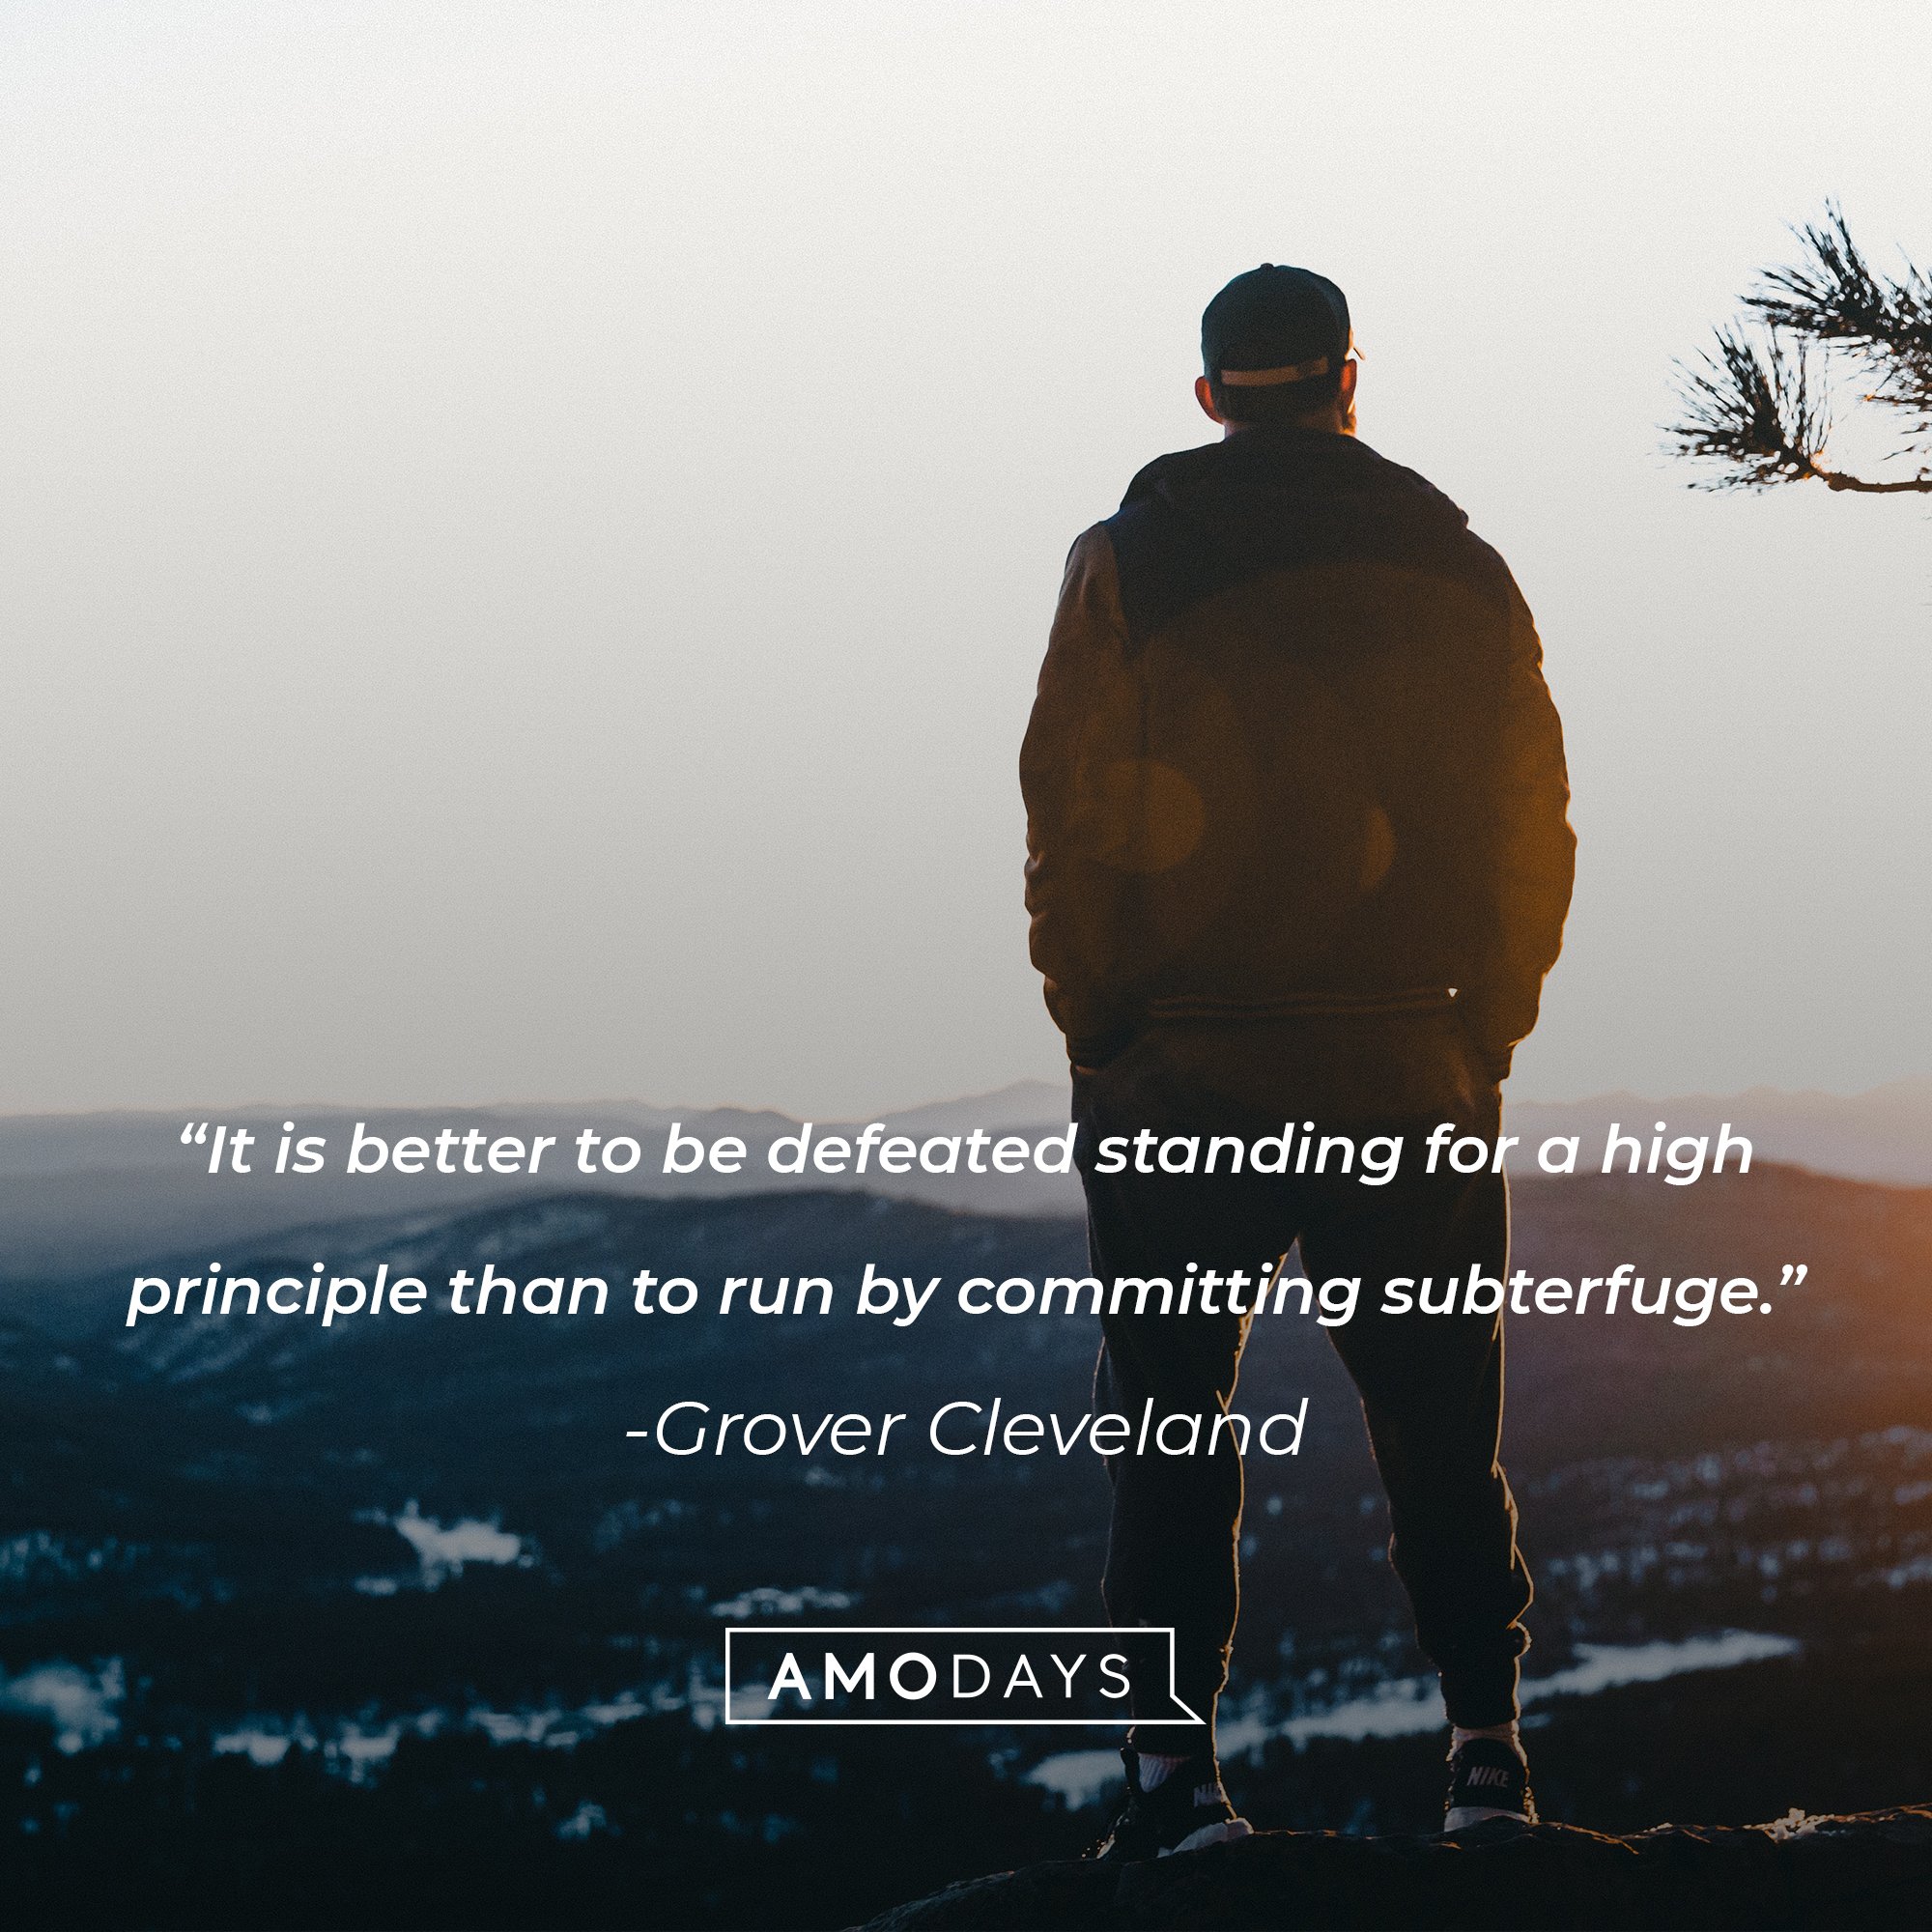 Grover Cleveland's quote: "It is better to be defeated standing for a high principle than to run by committing subterfuge." | Image: AmoDays